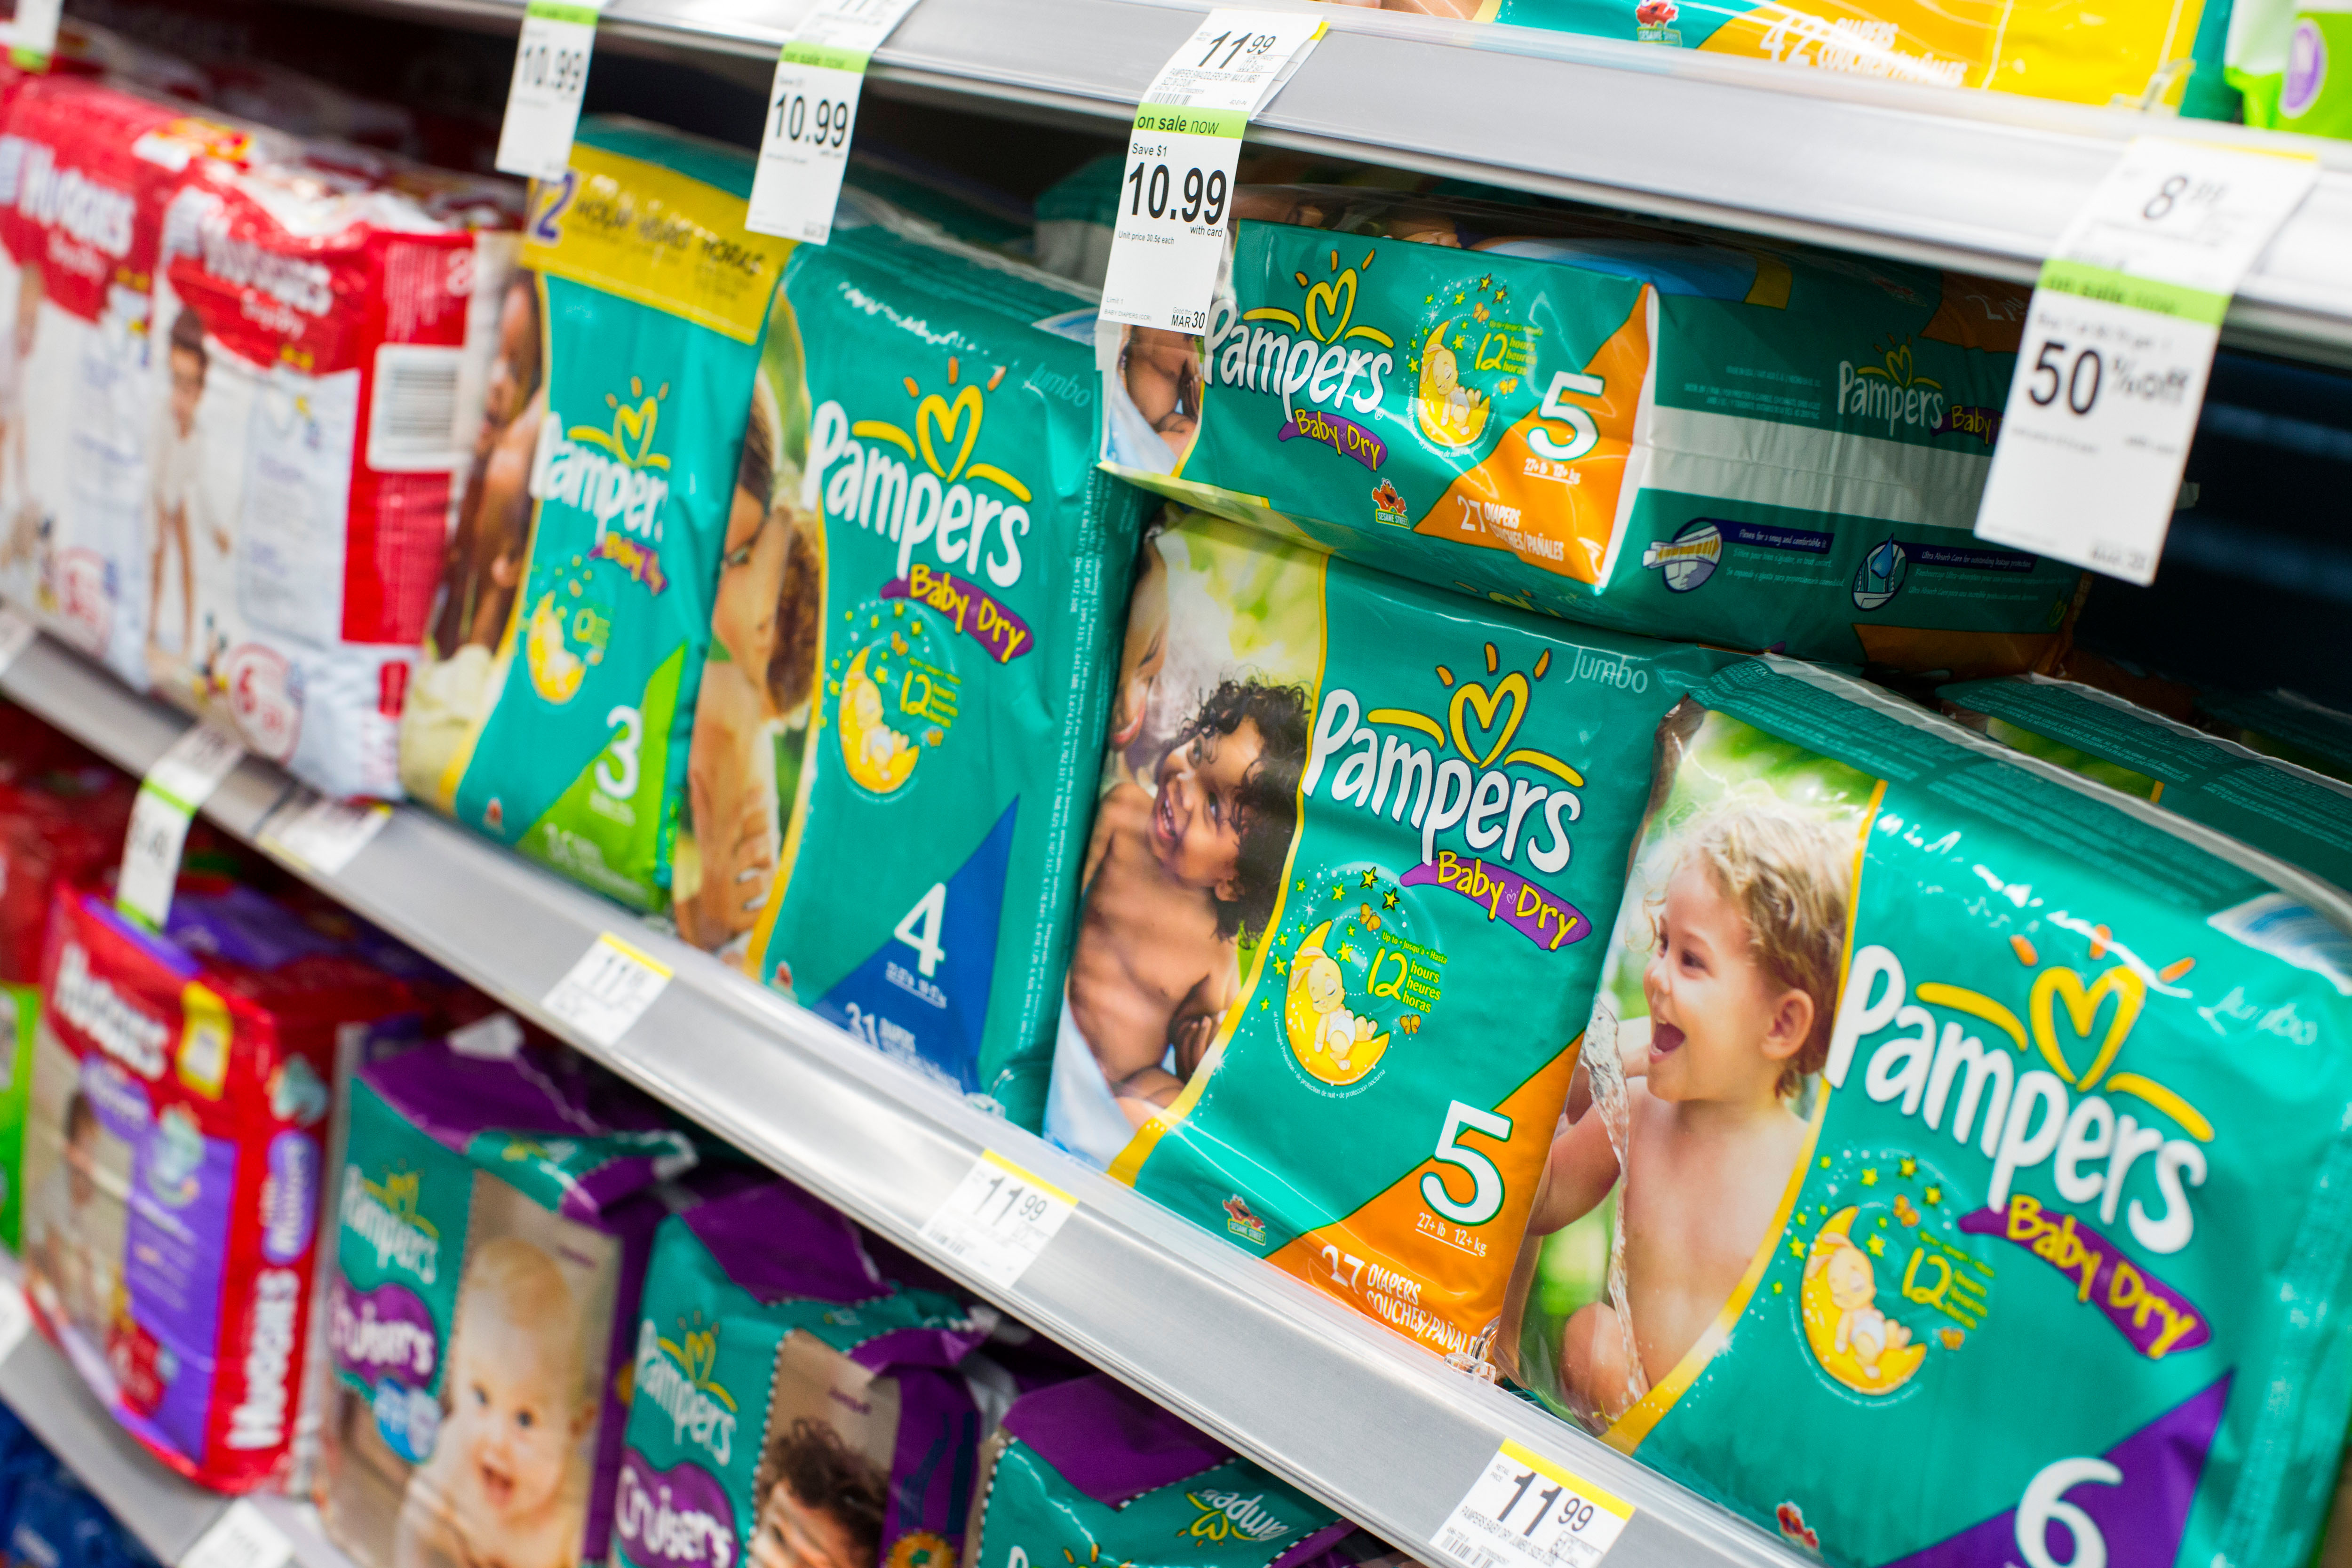 Pampers diapers on display at a store.